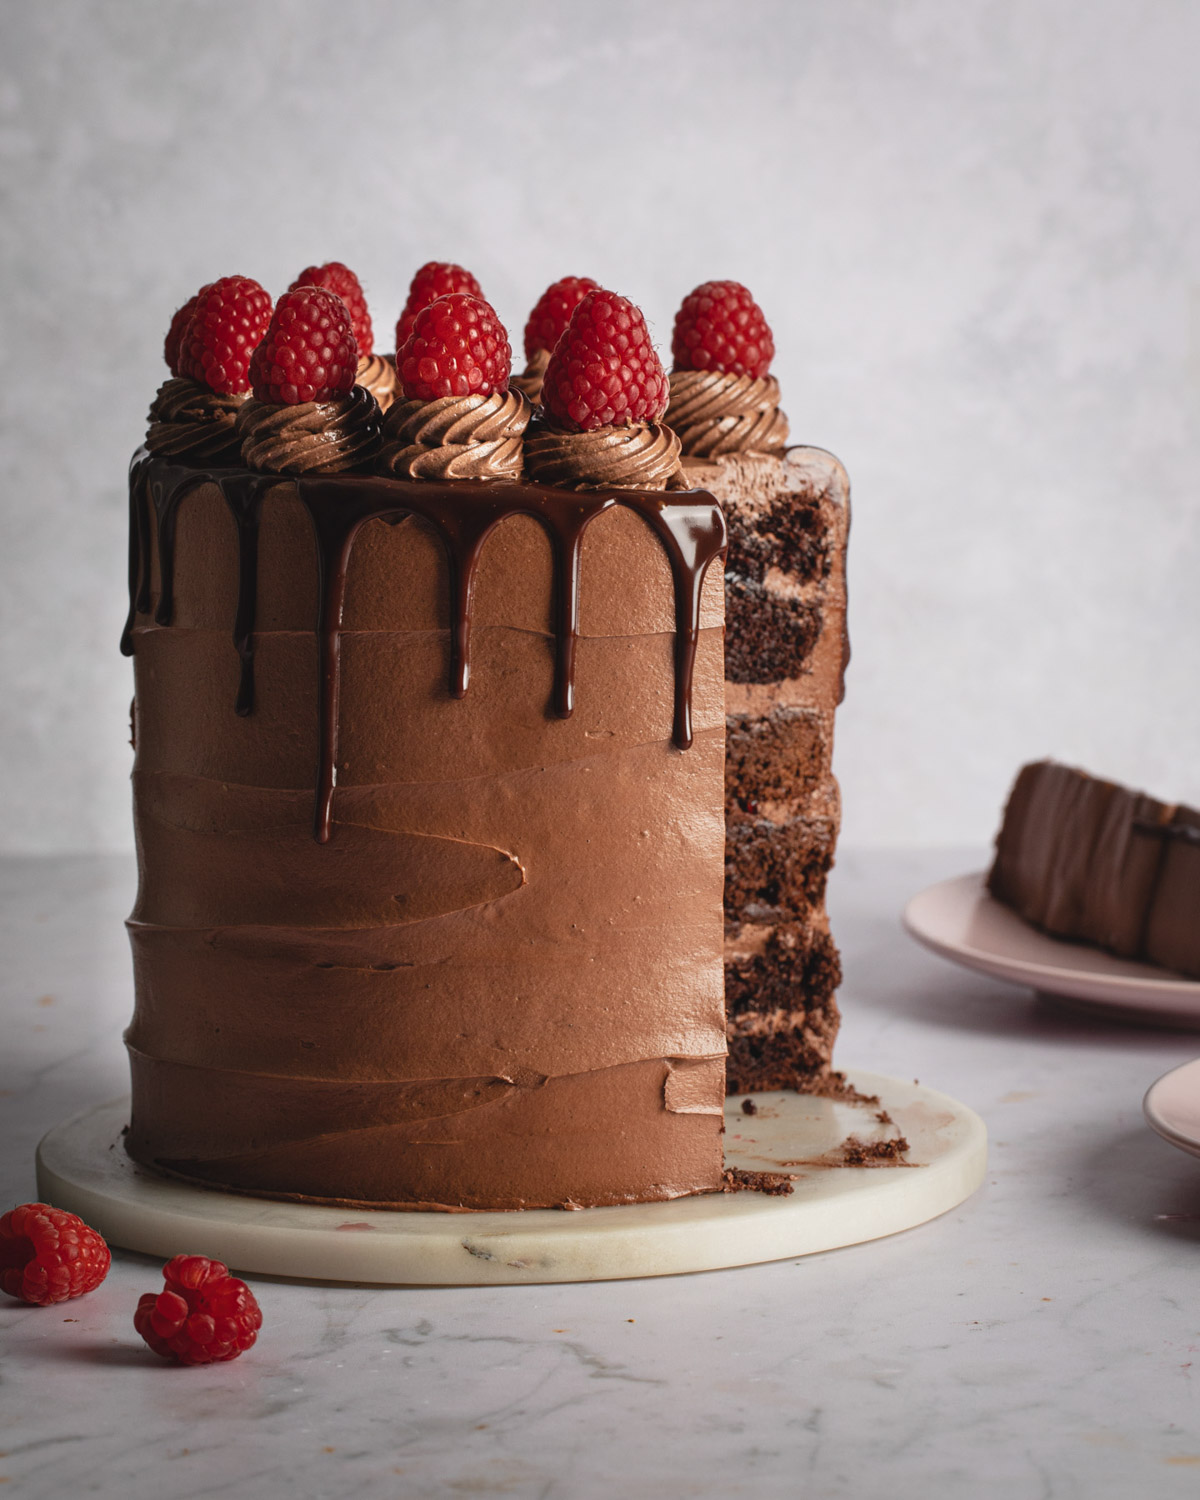 A Nutella cake with brownie and chocolate cake layers and raspberry jam